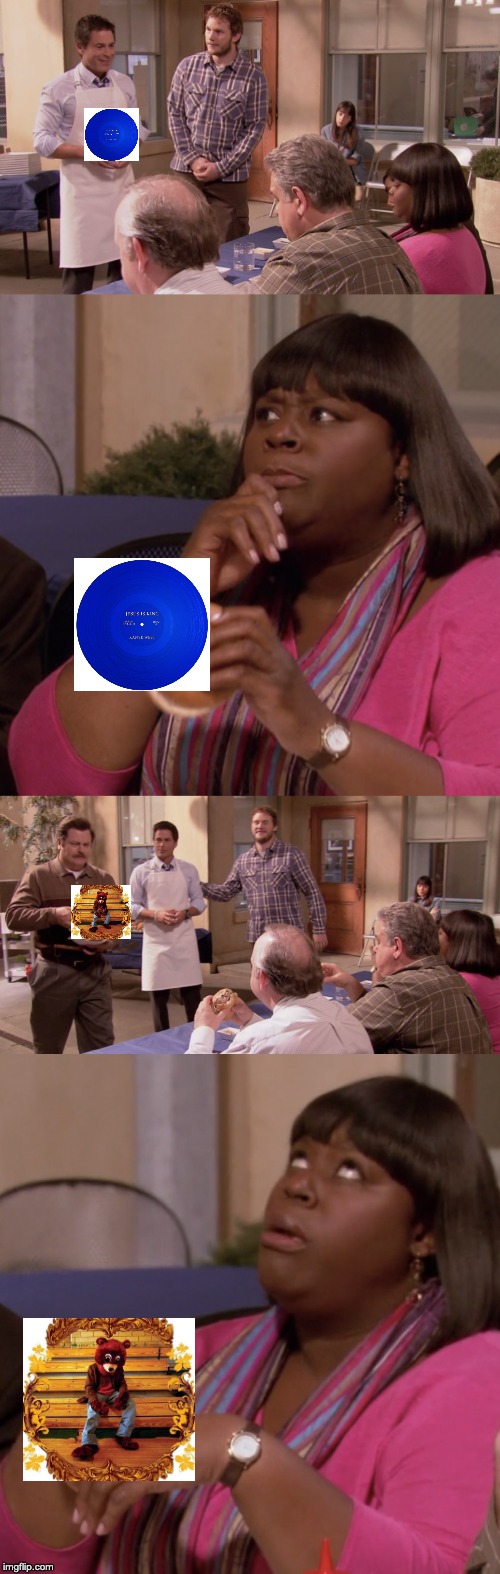 image tagged in kanye west,parks and rec | made w/ Imgflip meme maker